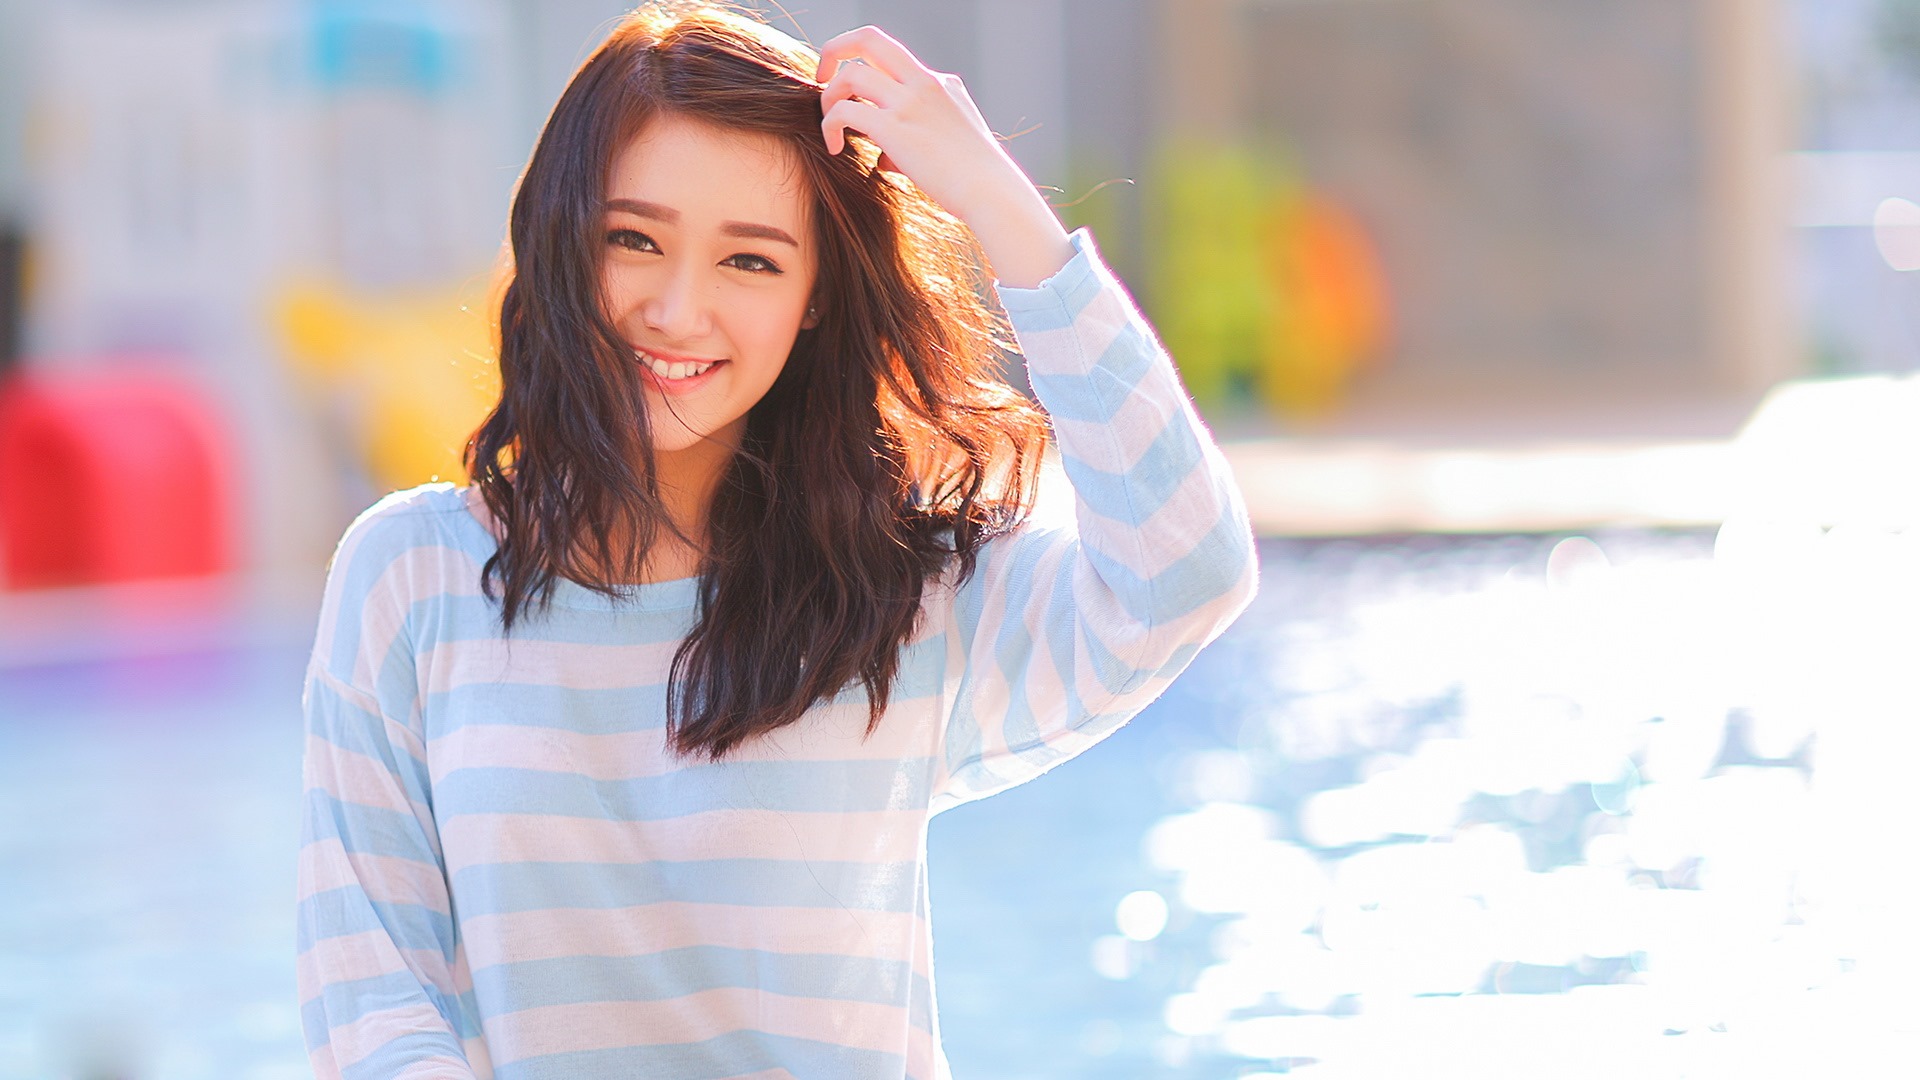 Pure and lovely young Asian girl HD wallpapers collection (1) #22 - 1920x1080